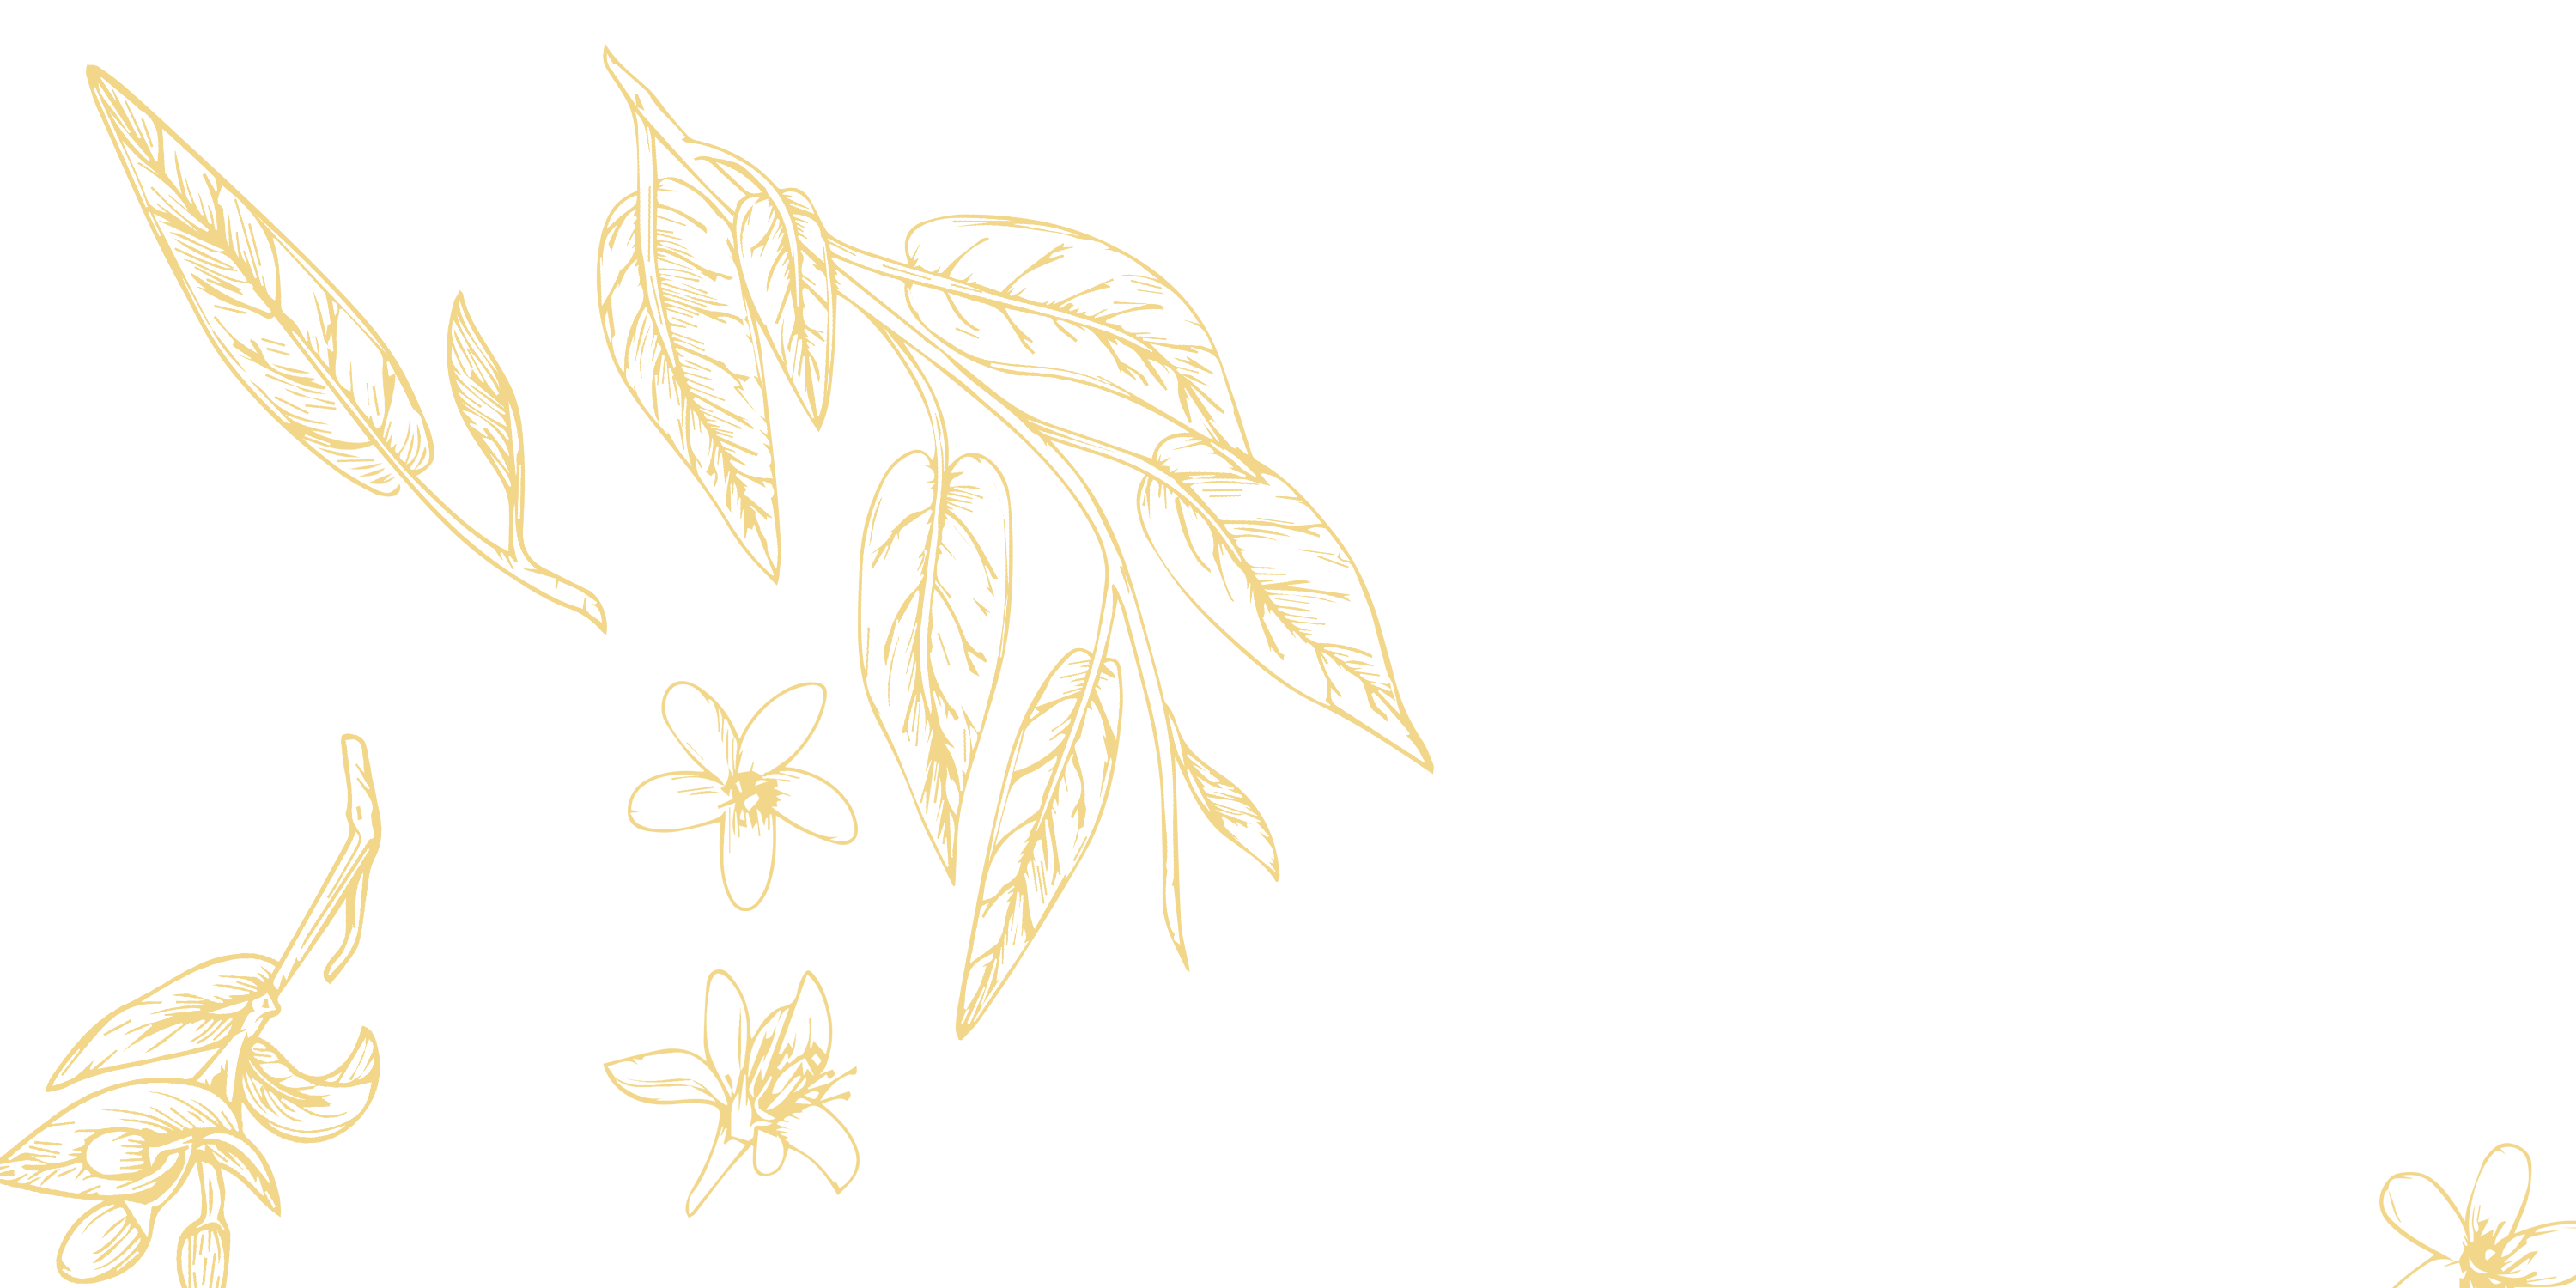 A black background with gold leaves and flowers.